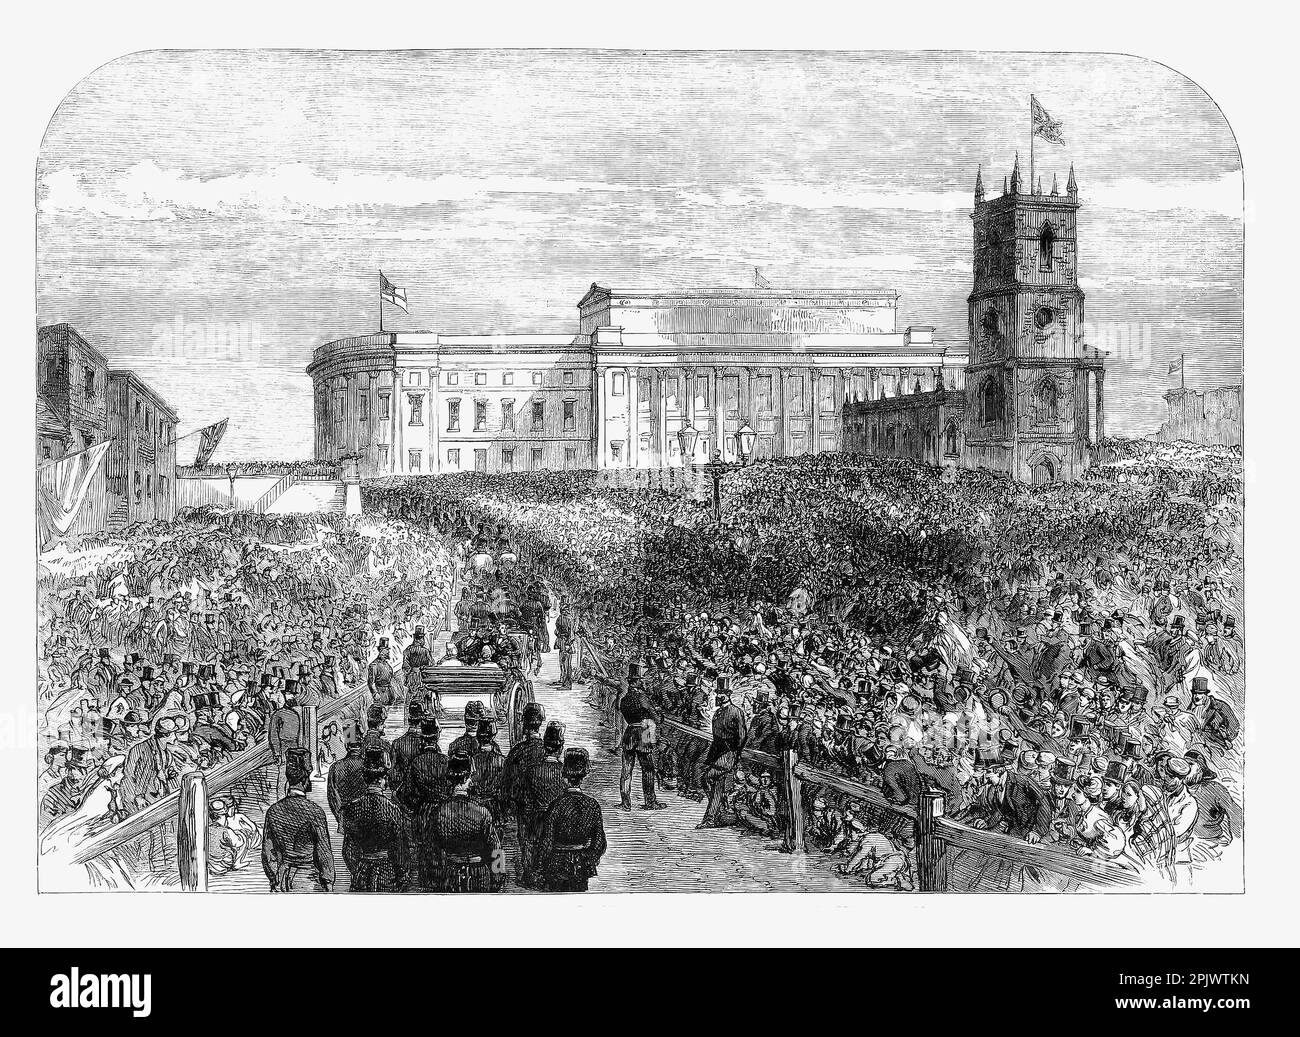 The Prince and Princess of Wales visit Saint George's Hall in Liverpool in November 1865. The hall, opened in 1854, is a Neoclassical building which contains concert halls and law courts, is now  opposite Lime Street railway station (where the church stood) in the centre of Liverpool, England. Stock Photo